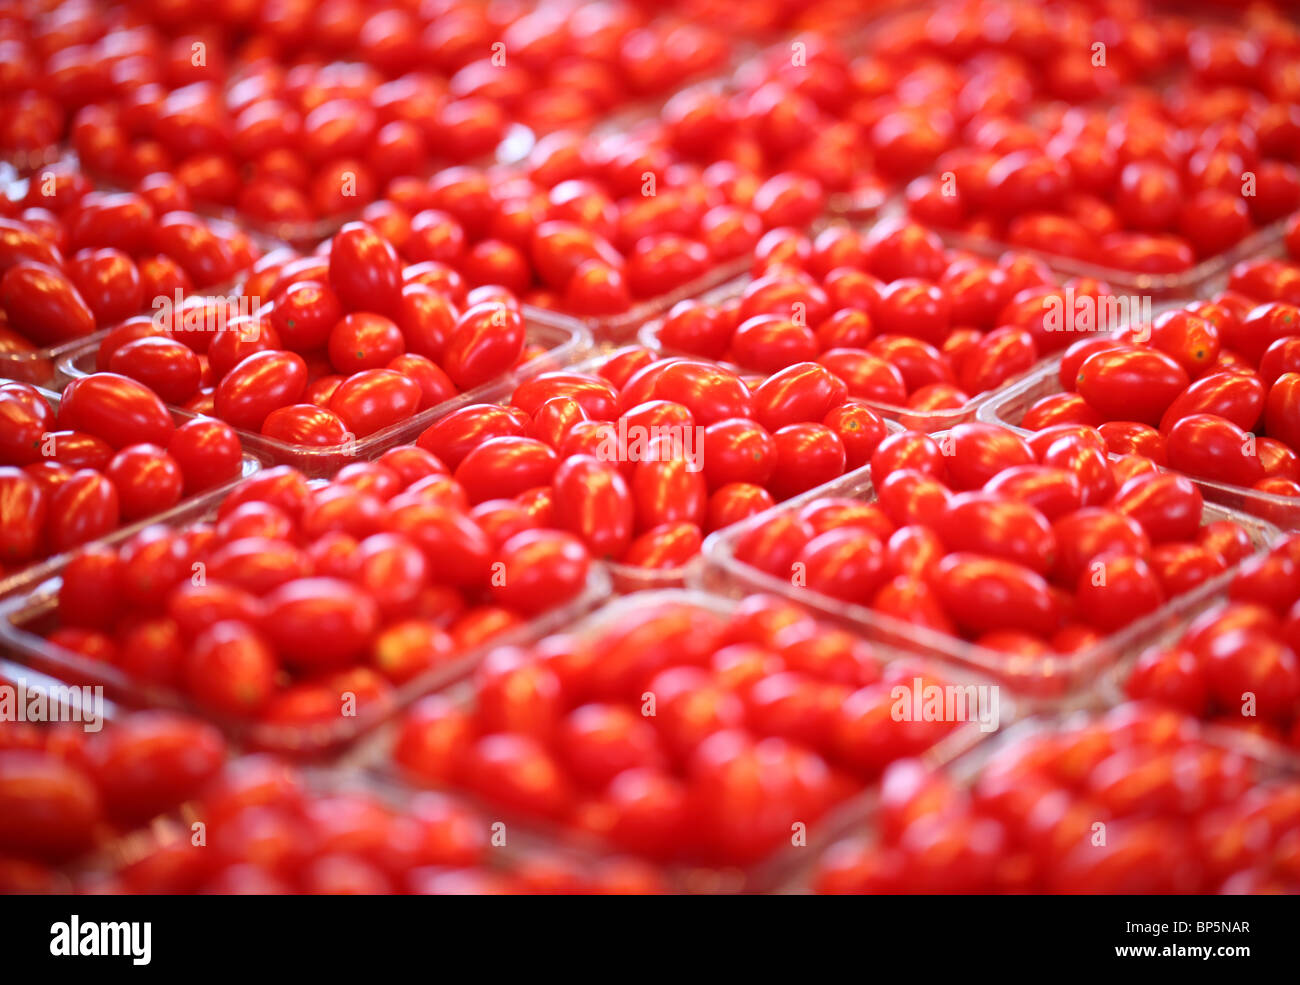 A collection of trays with fresh farmer's market red cherry tomatoes Stock Photo